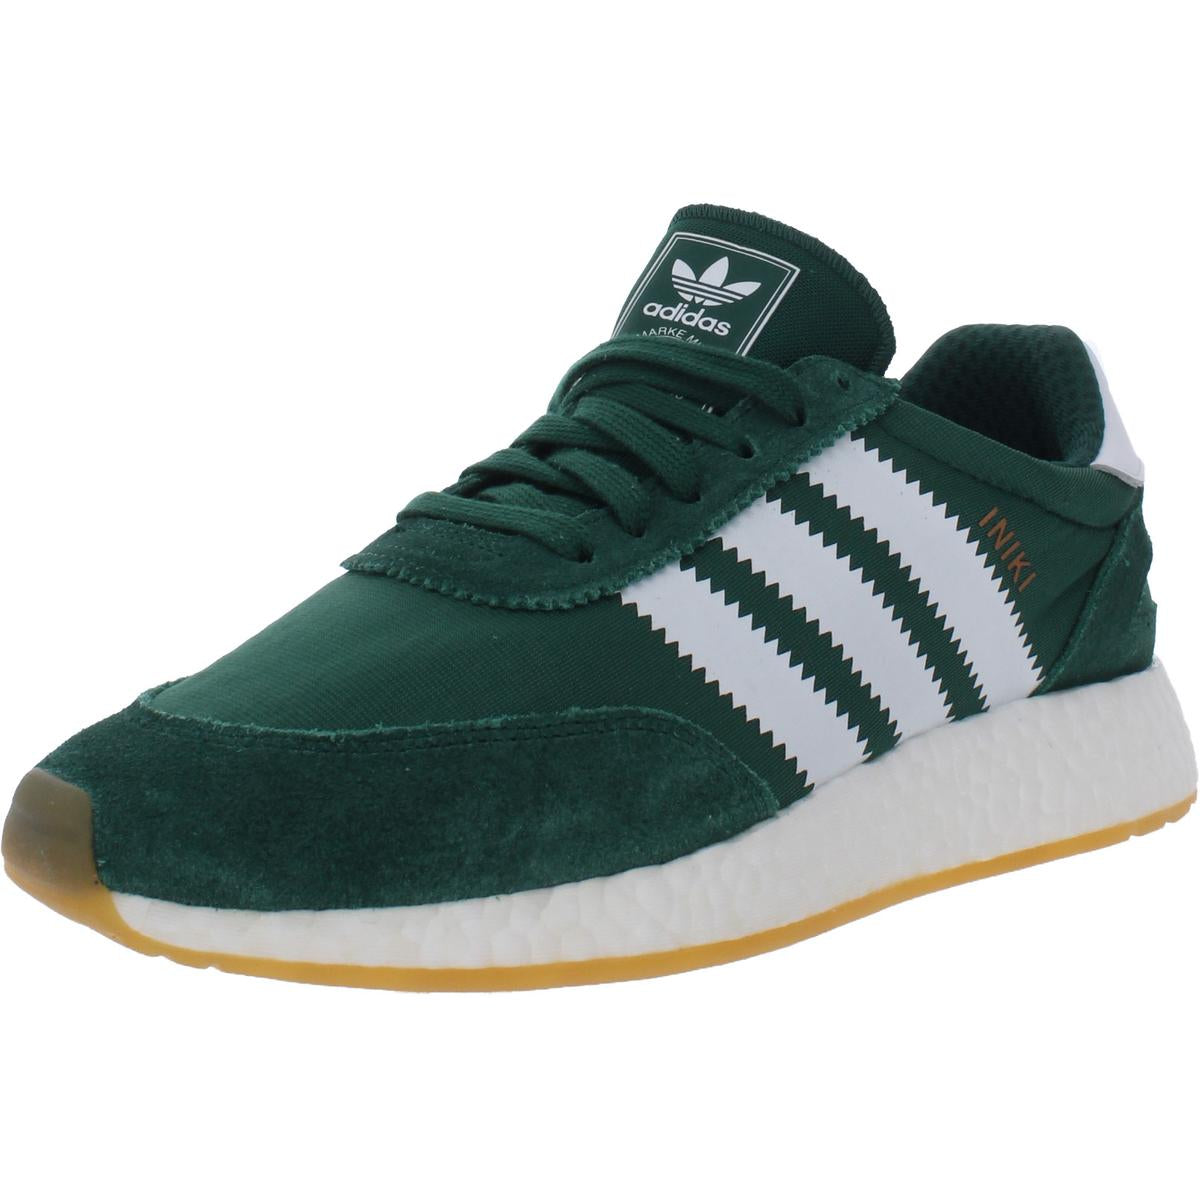 Iniki Mens Suede Lifestyle Running Shoes